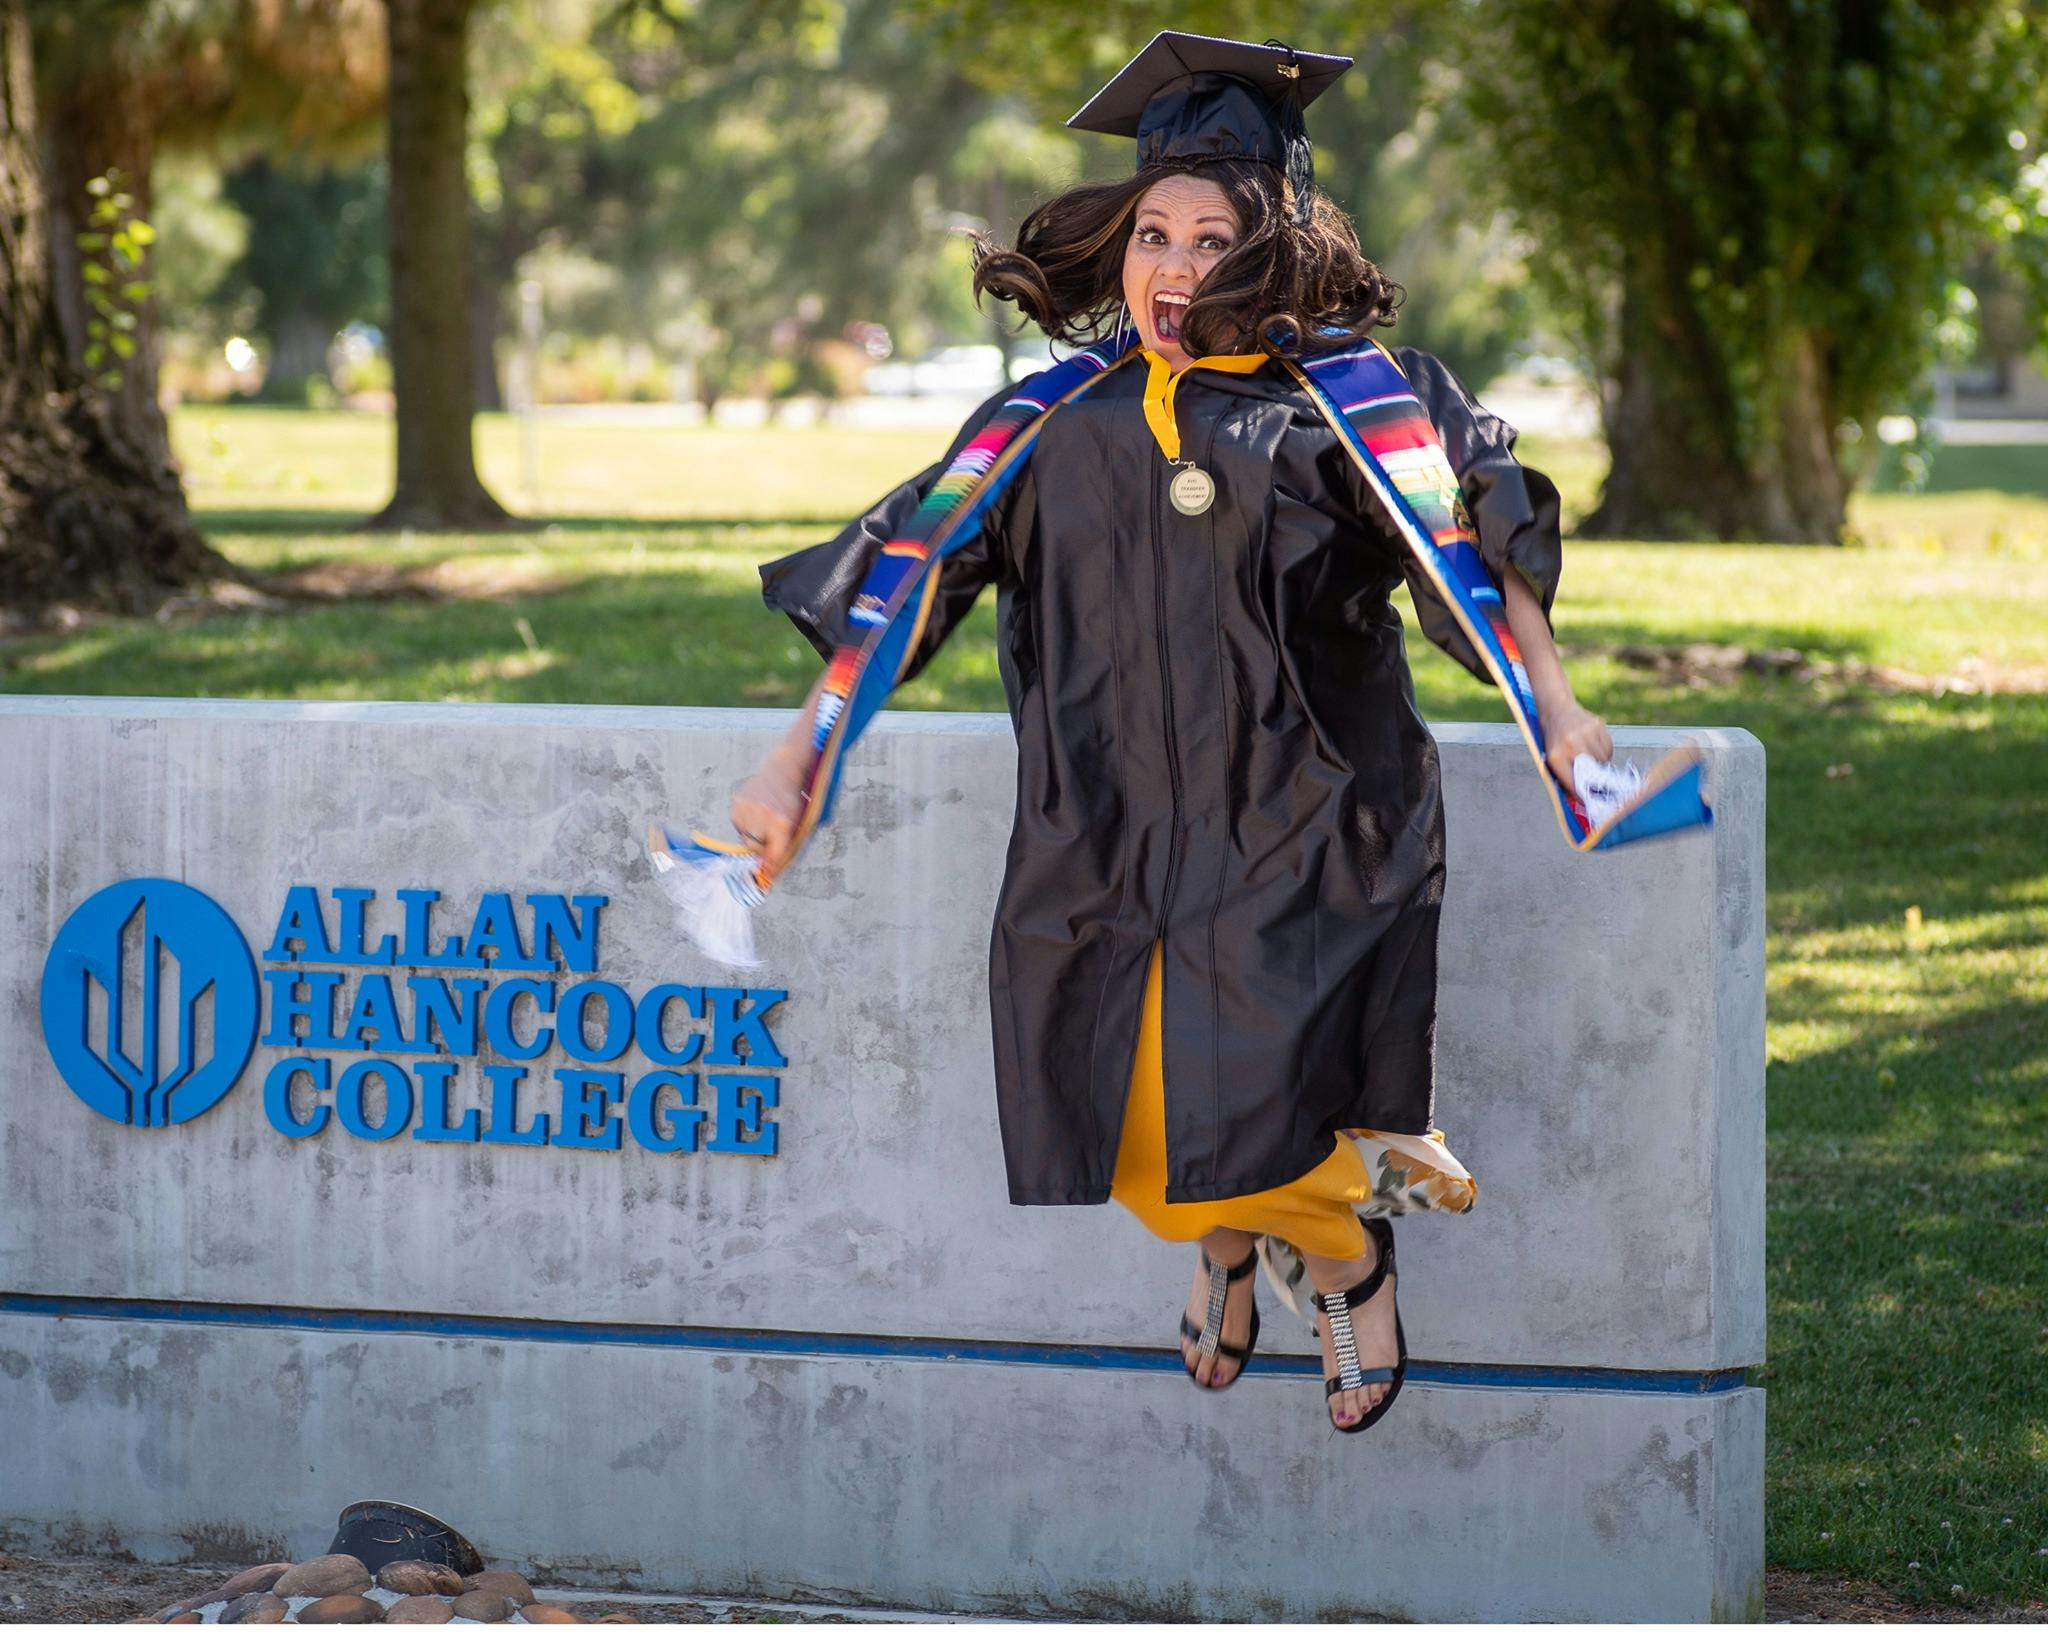 A student in a graduation cap and gown jumping up into the air next to a stone sign for Allan Hancock College.